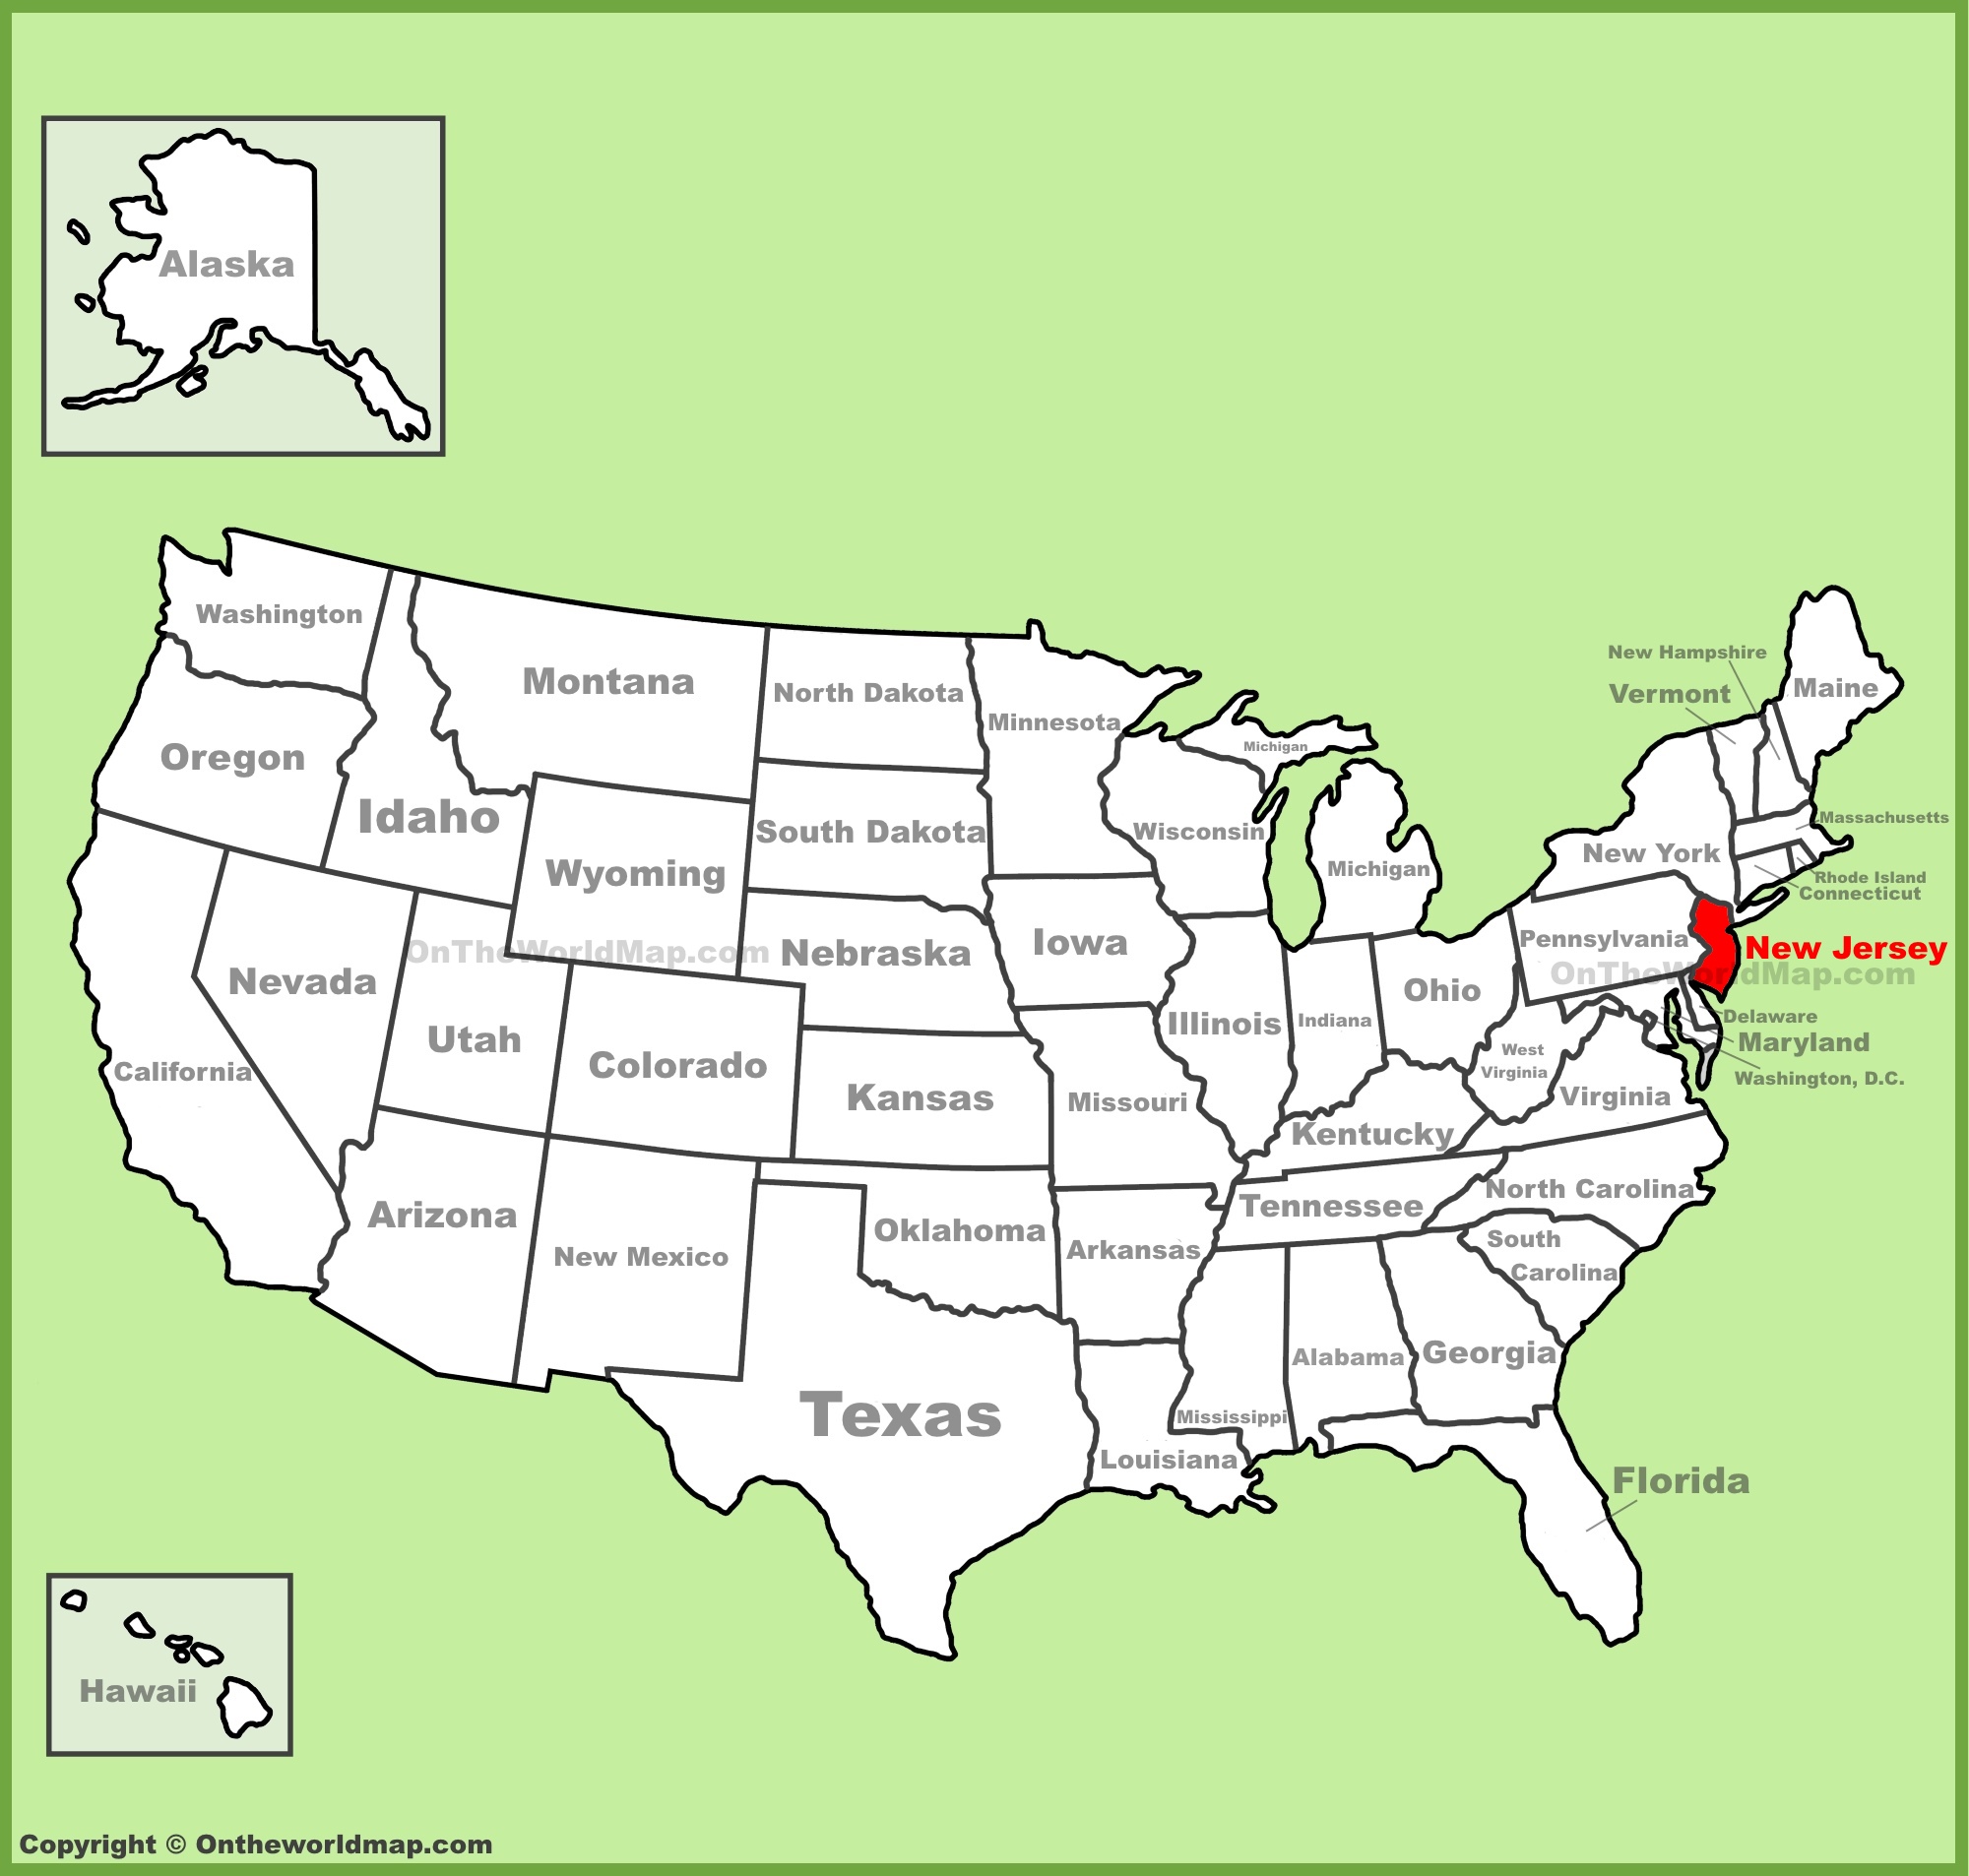 New Jersey Location On The Us Map 